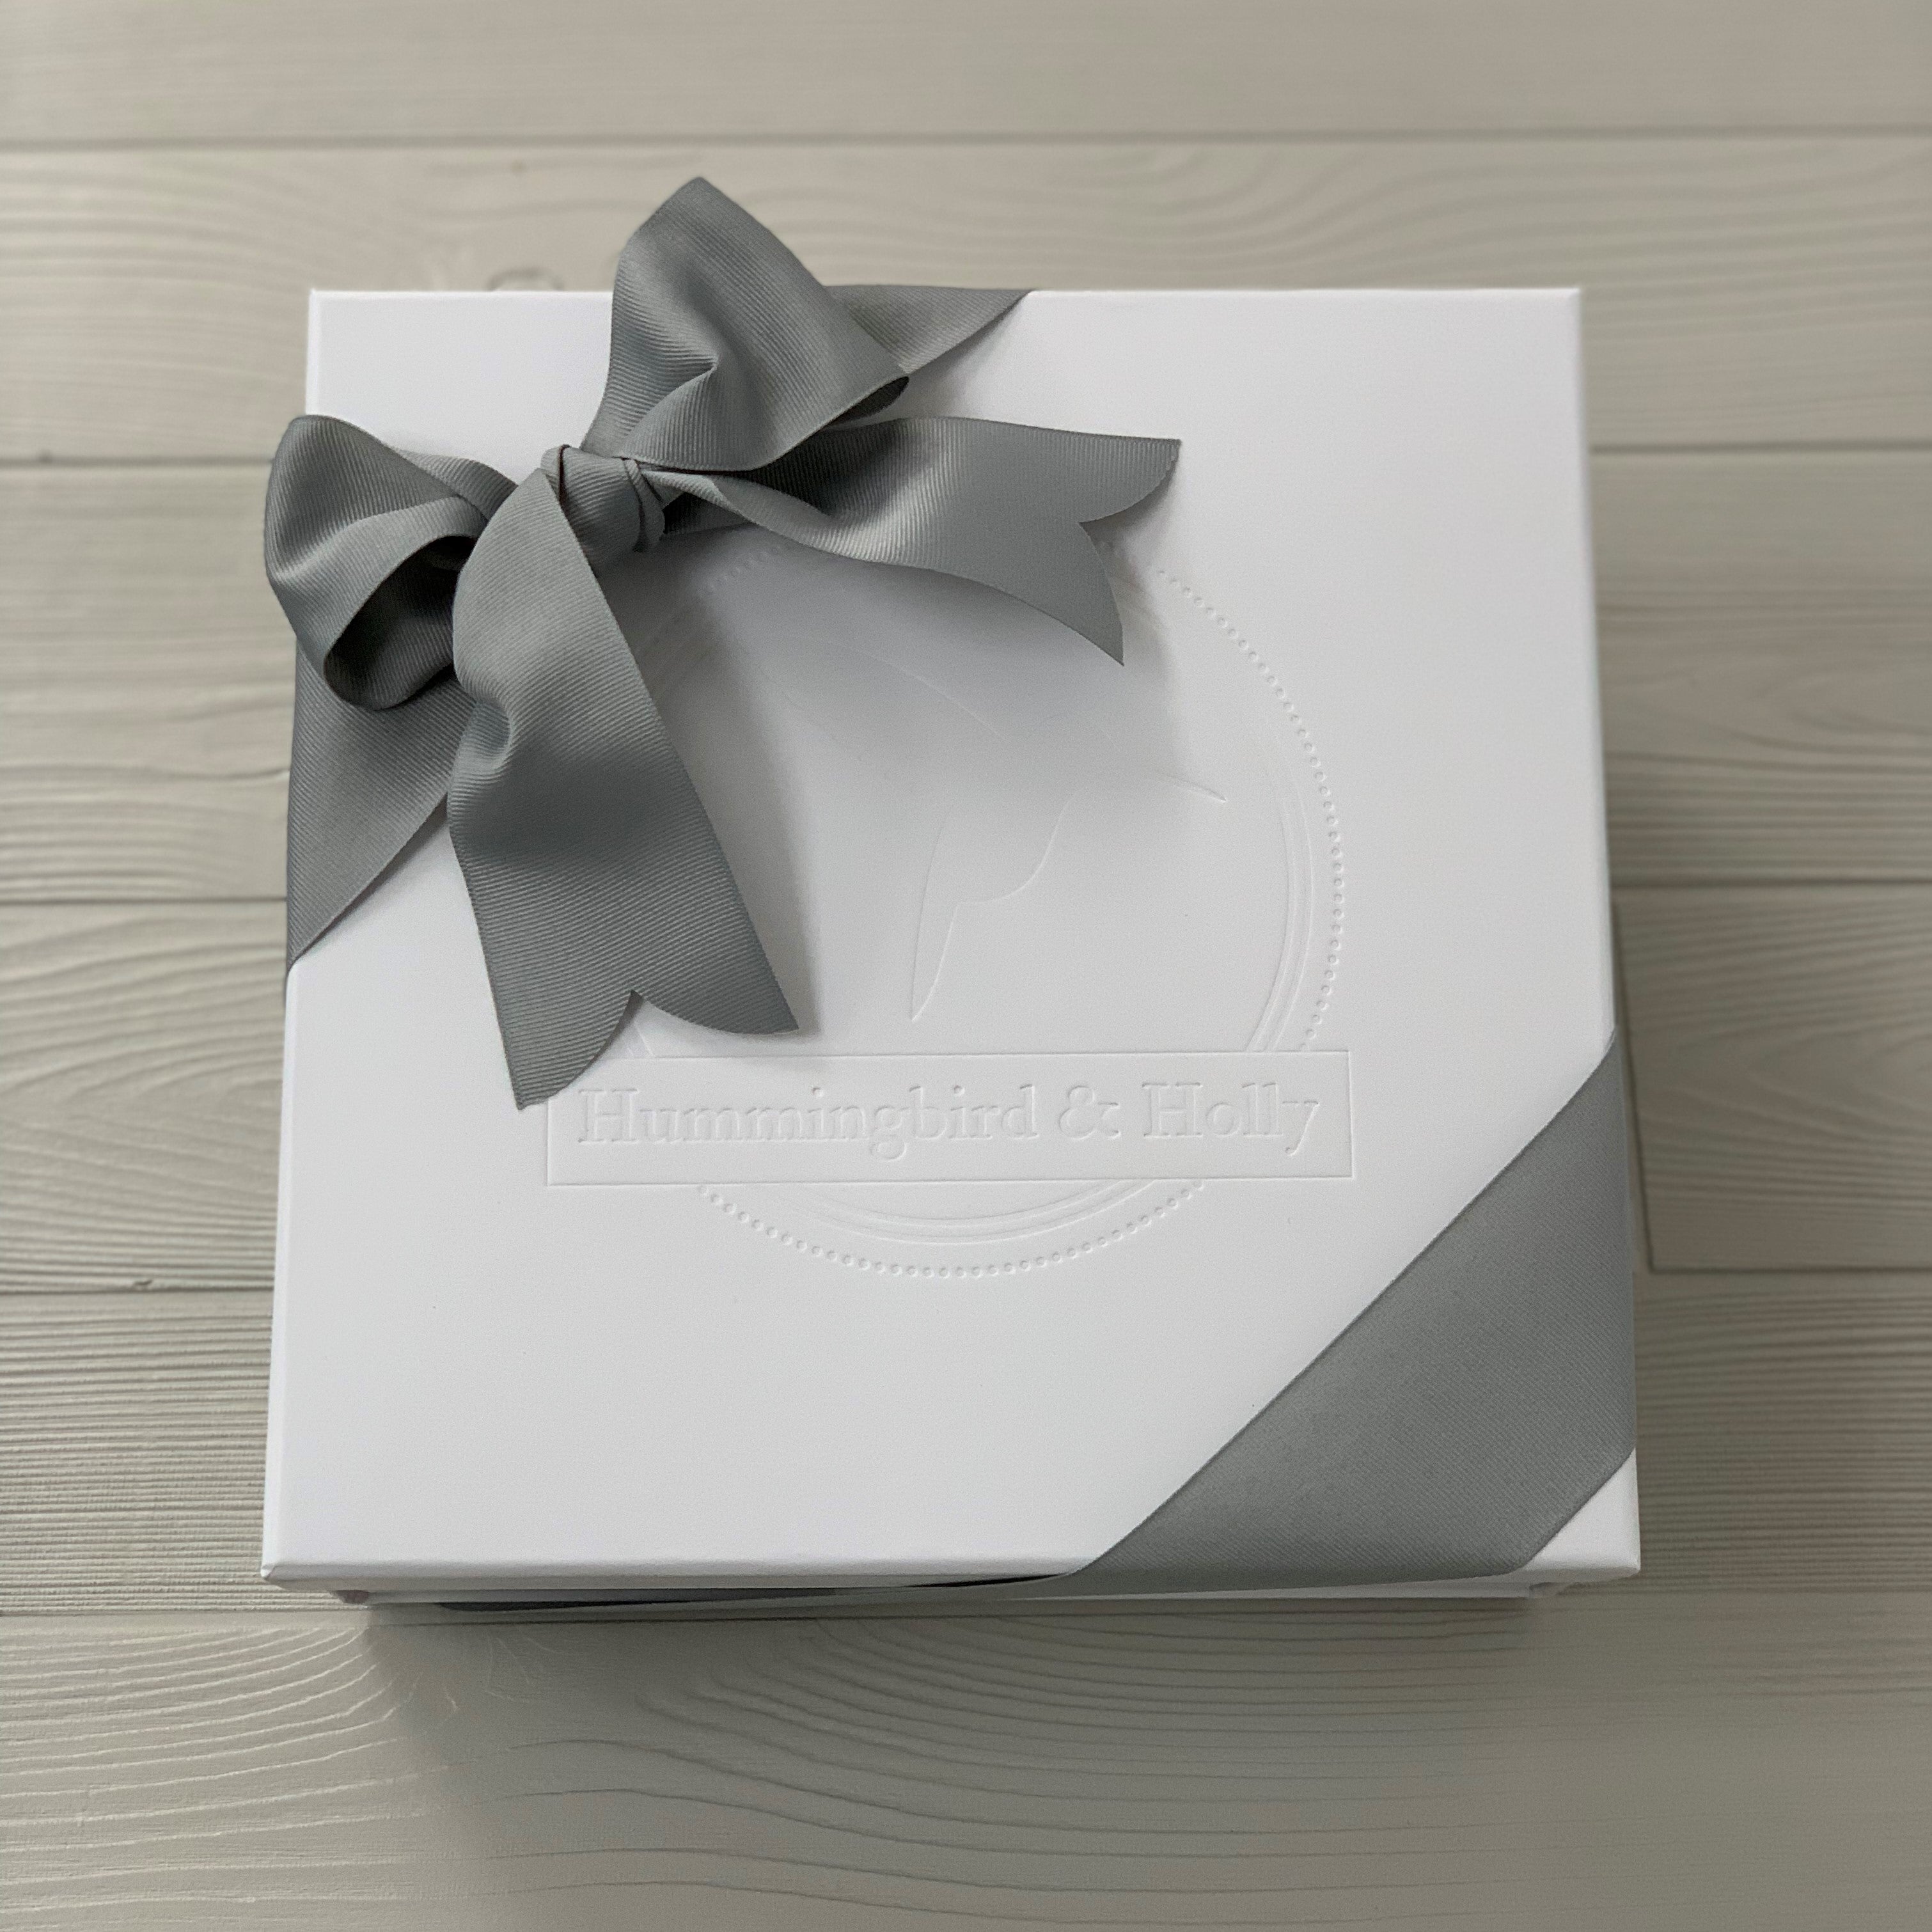 close up of the white gift box included in our snips & snails & puppy dog tails gift basket